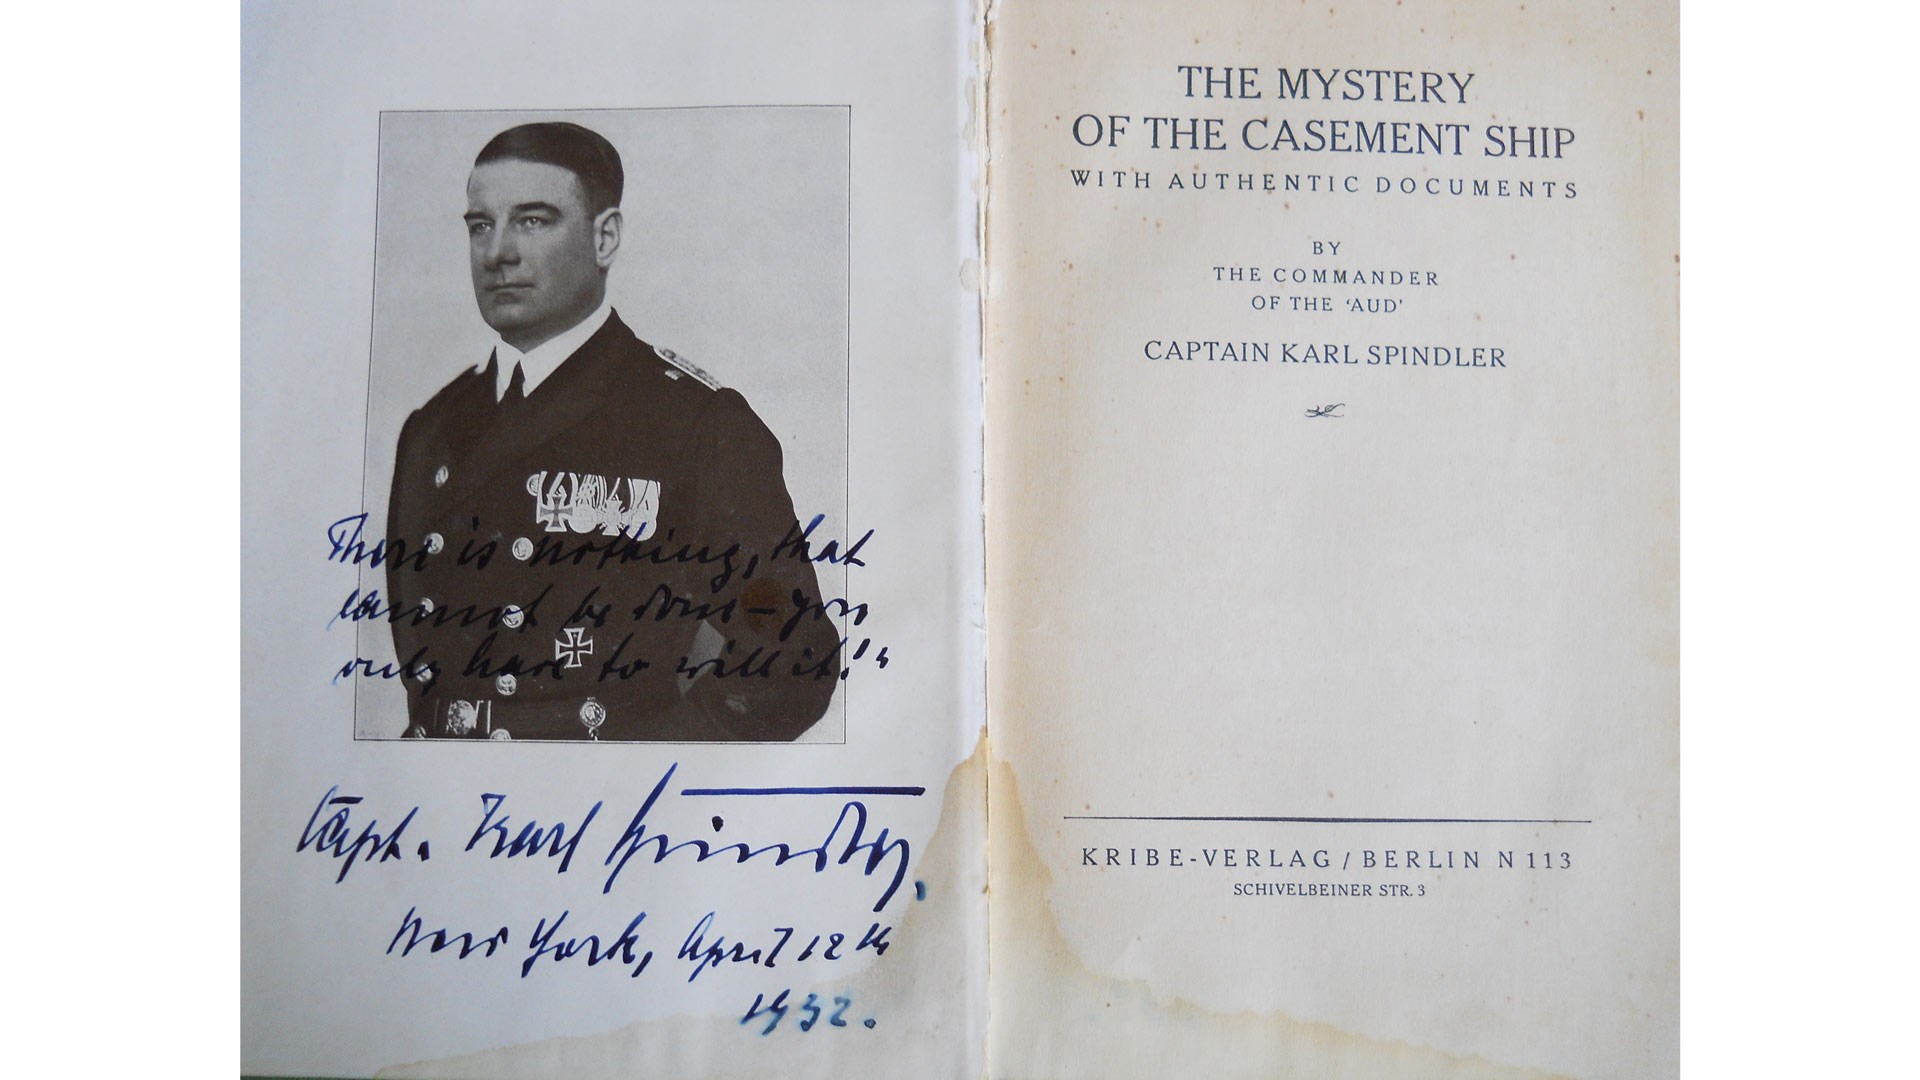 The Mystery Of The Casement Ship booklet and photograph signature writing ink